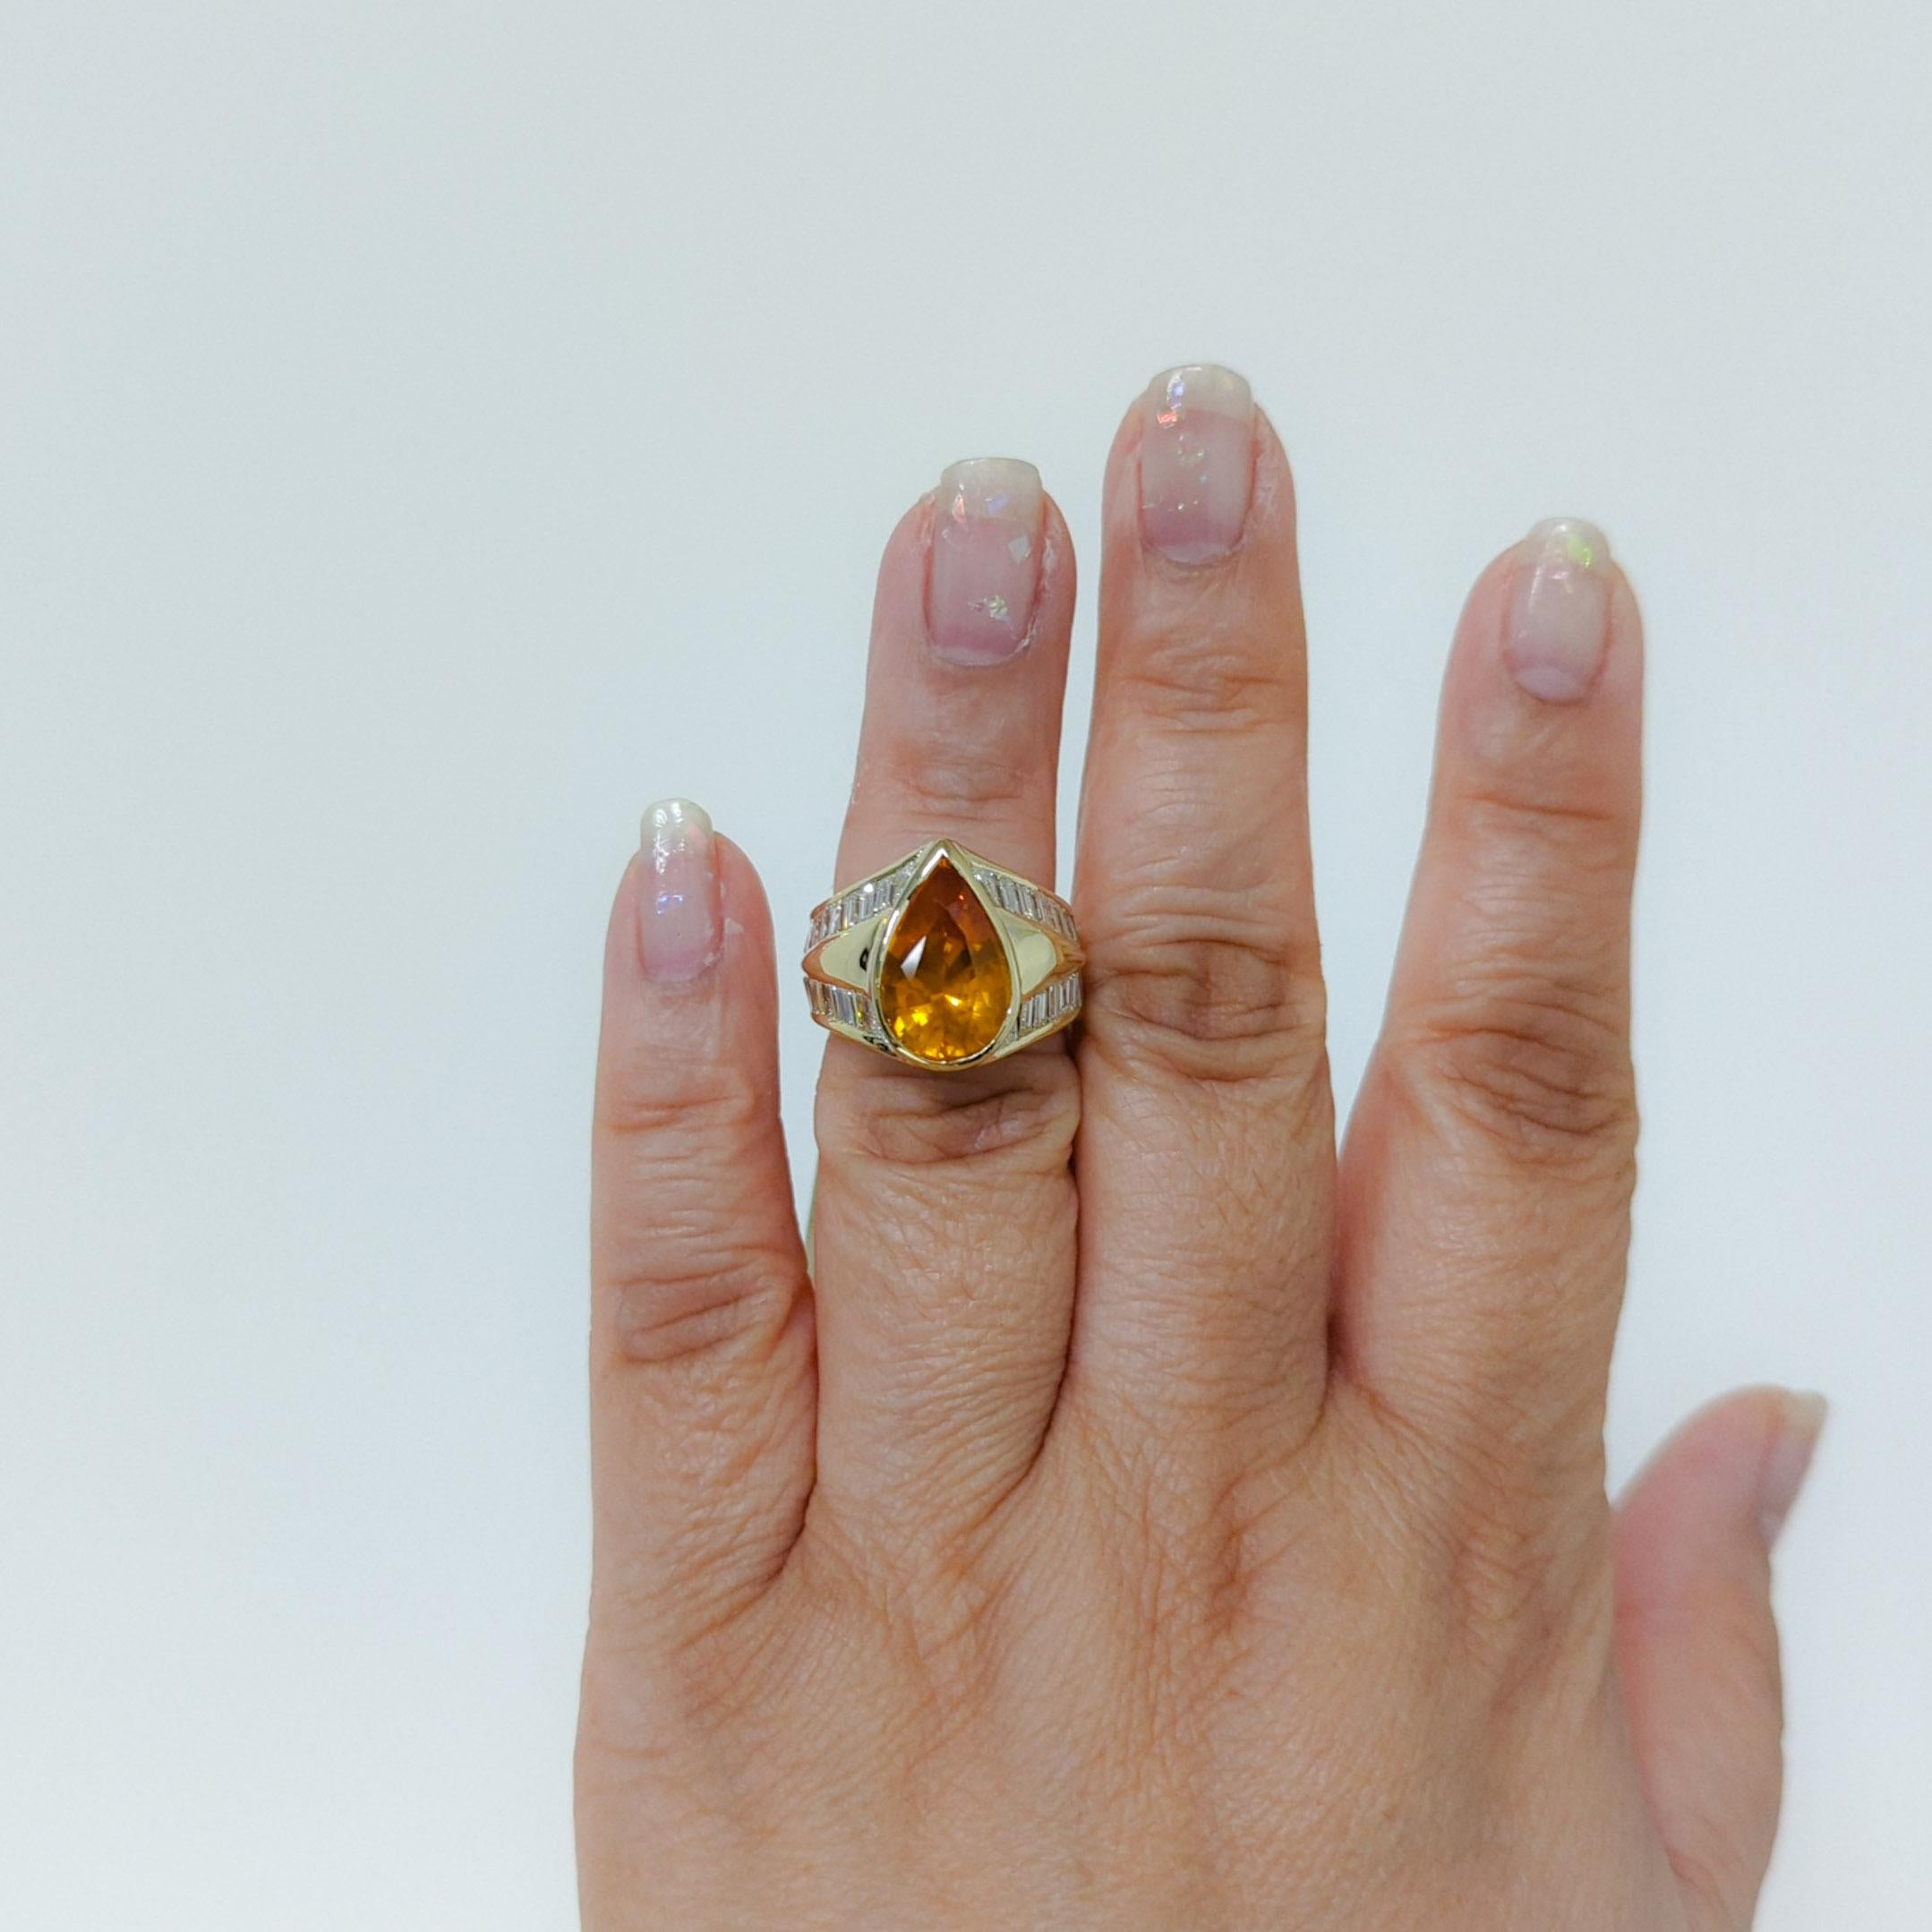 Absolutely stunning 6.65 ct. GIA certified yellow orange sapphire pear shape with 4.00 ct. good quality white diamond baguettes.  Handmade in 18k yellow gold.  Ring size 6.25.  GIA certificate included.